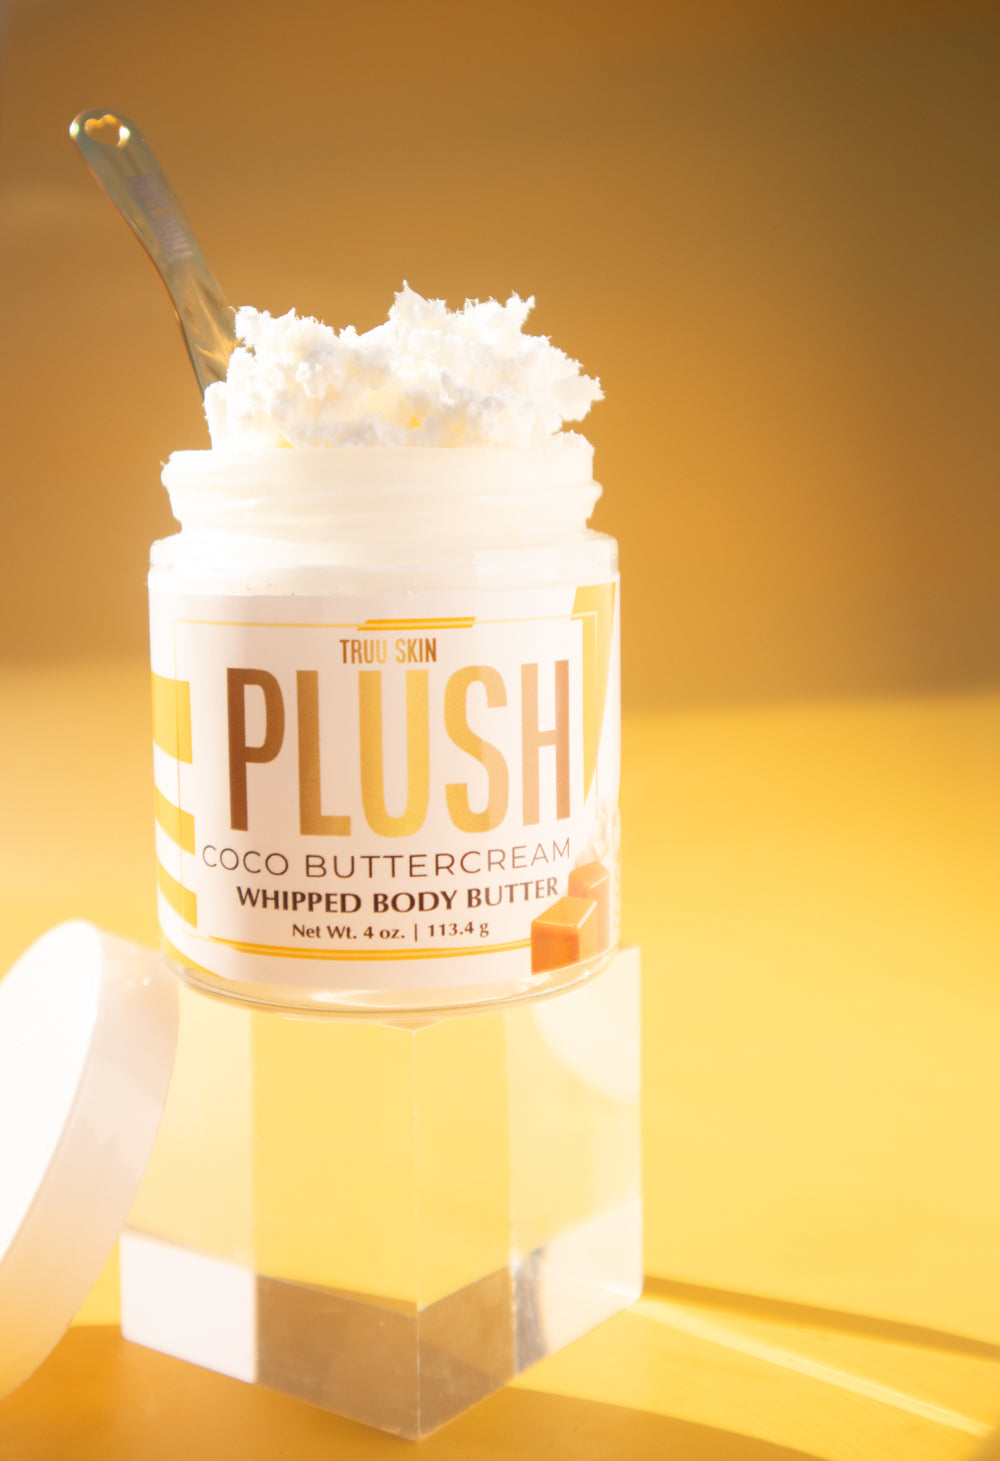 NEW! Coco Buttercream Whipped Body Butter with Gold Applicator Scooper Bundle